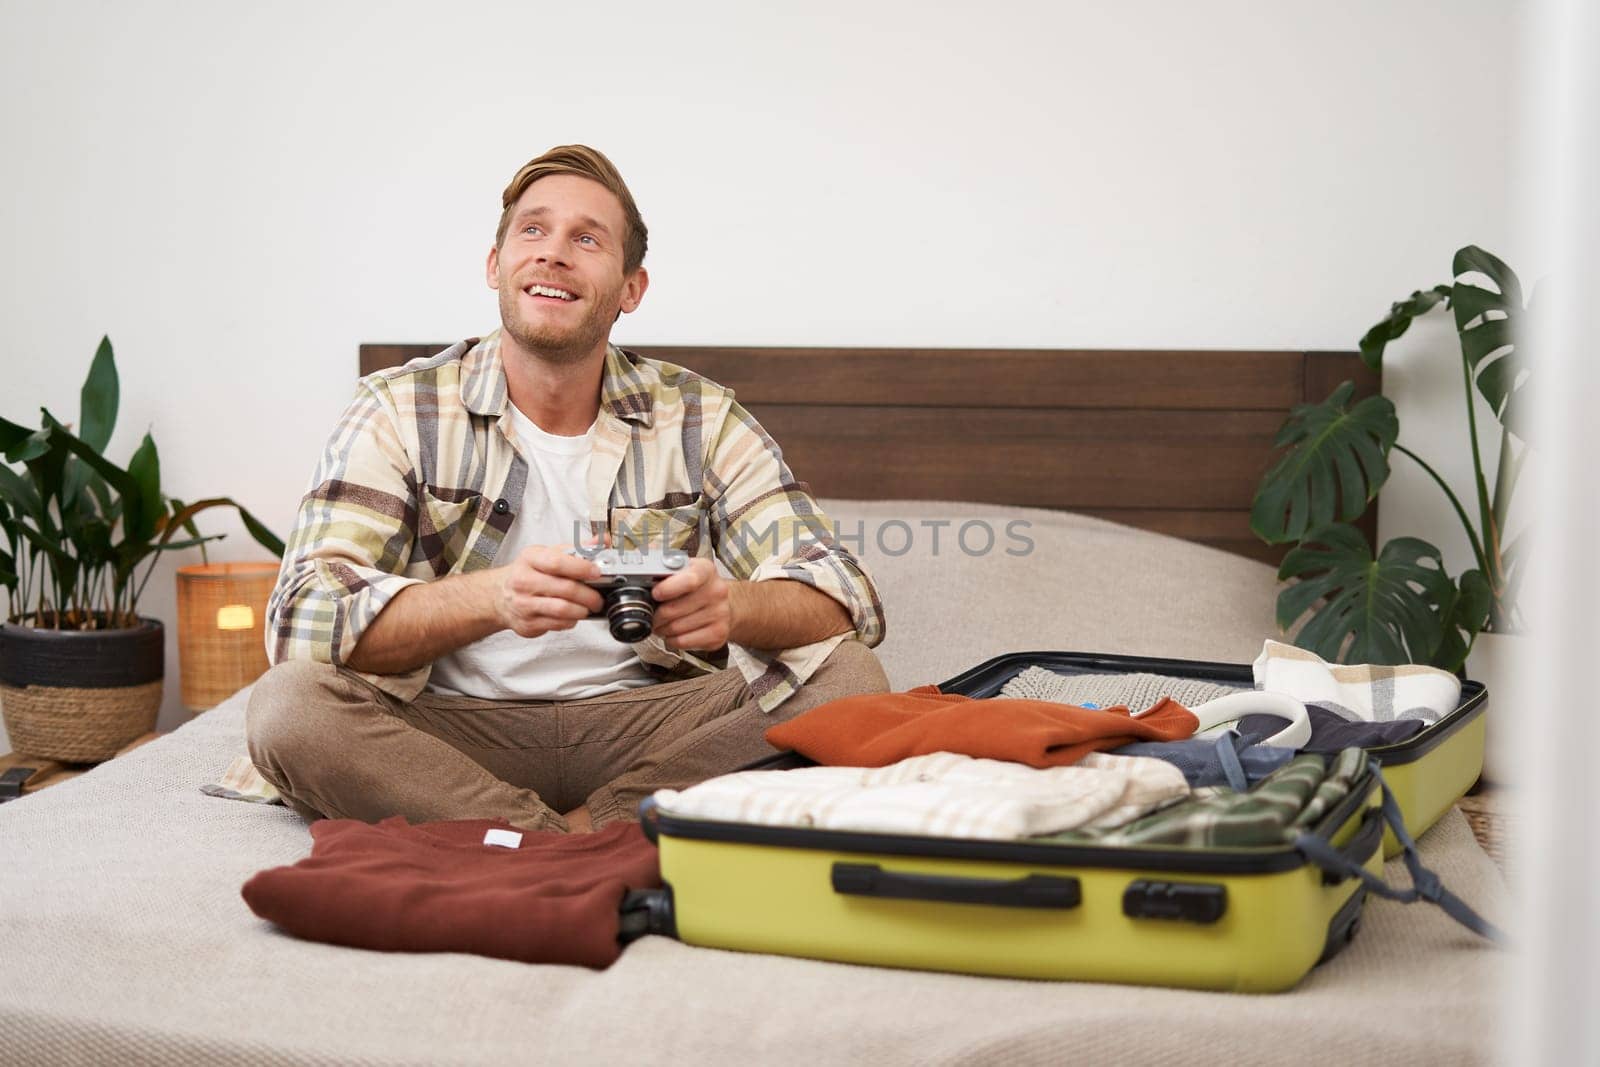 Portrait of young excited man, sits on bed with suitcase, going on holiday, holding digital camera, going through photo album on gadget, preparing for summer vacation.